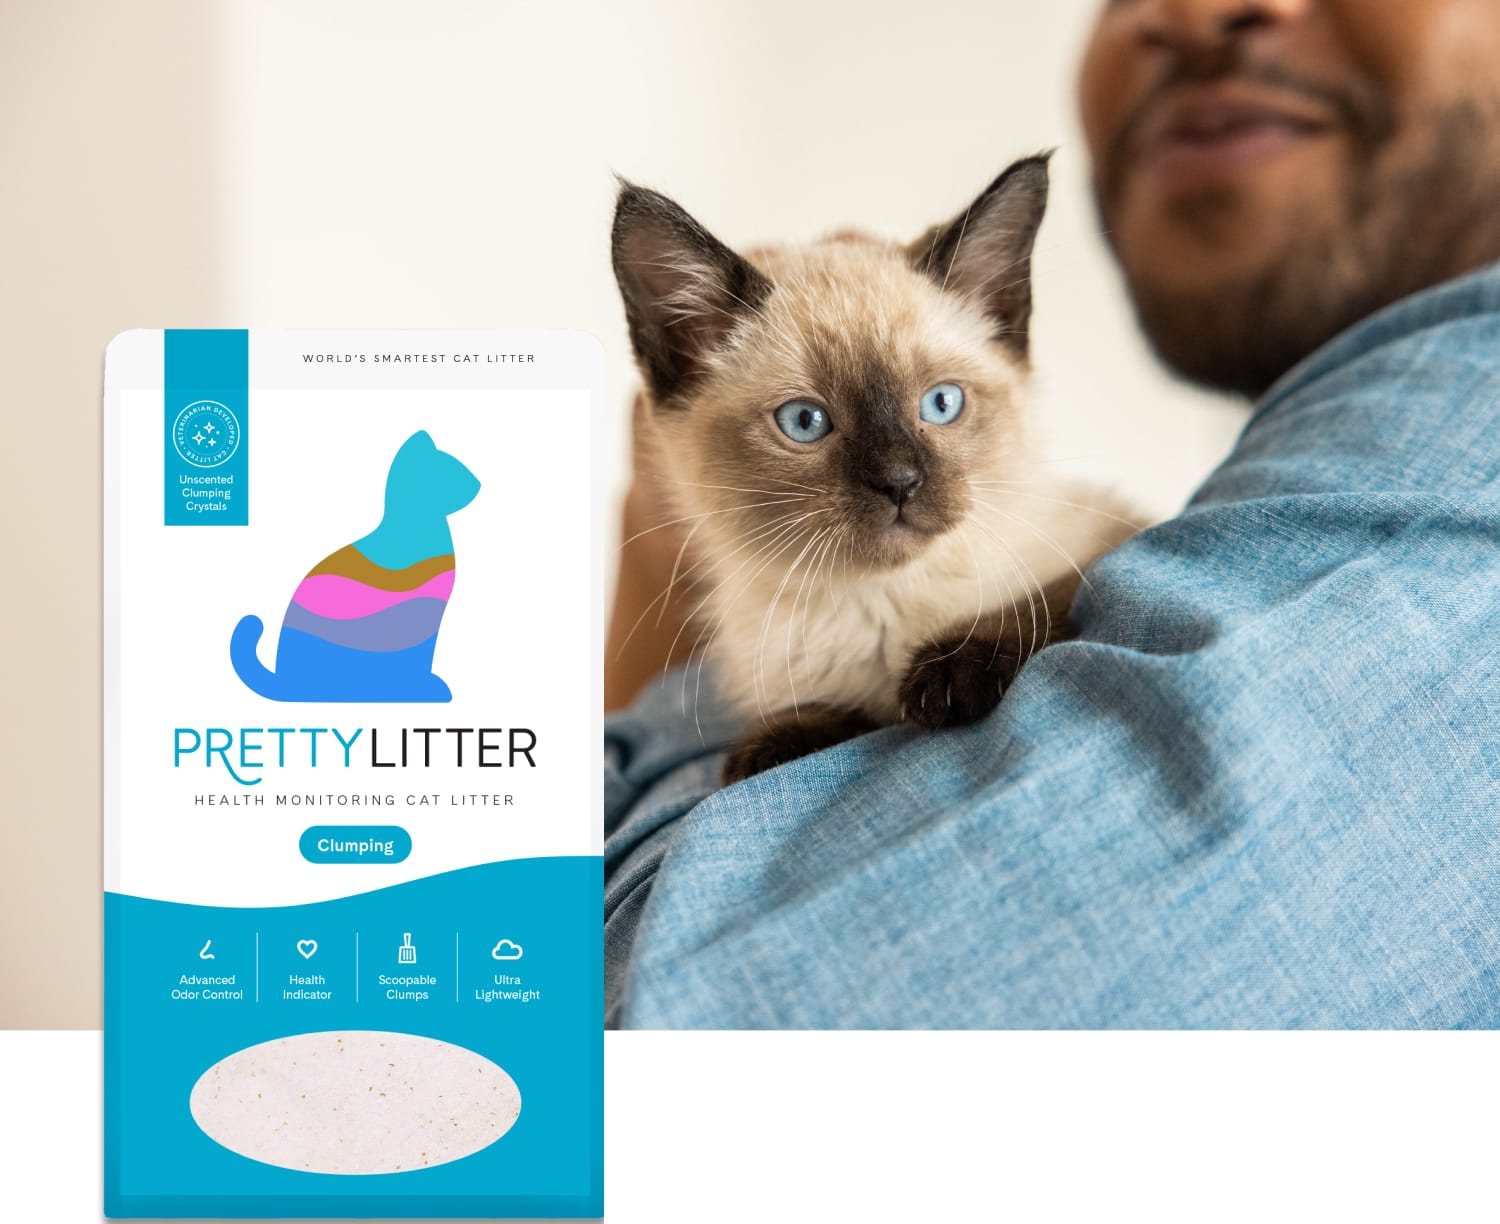 Man holding a cat next to PrettyLitter bag